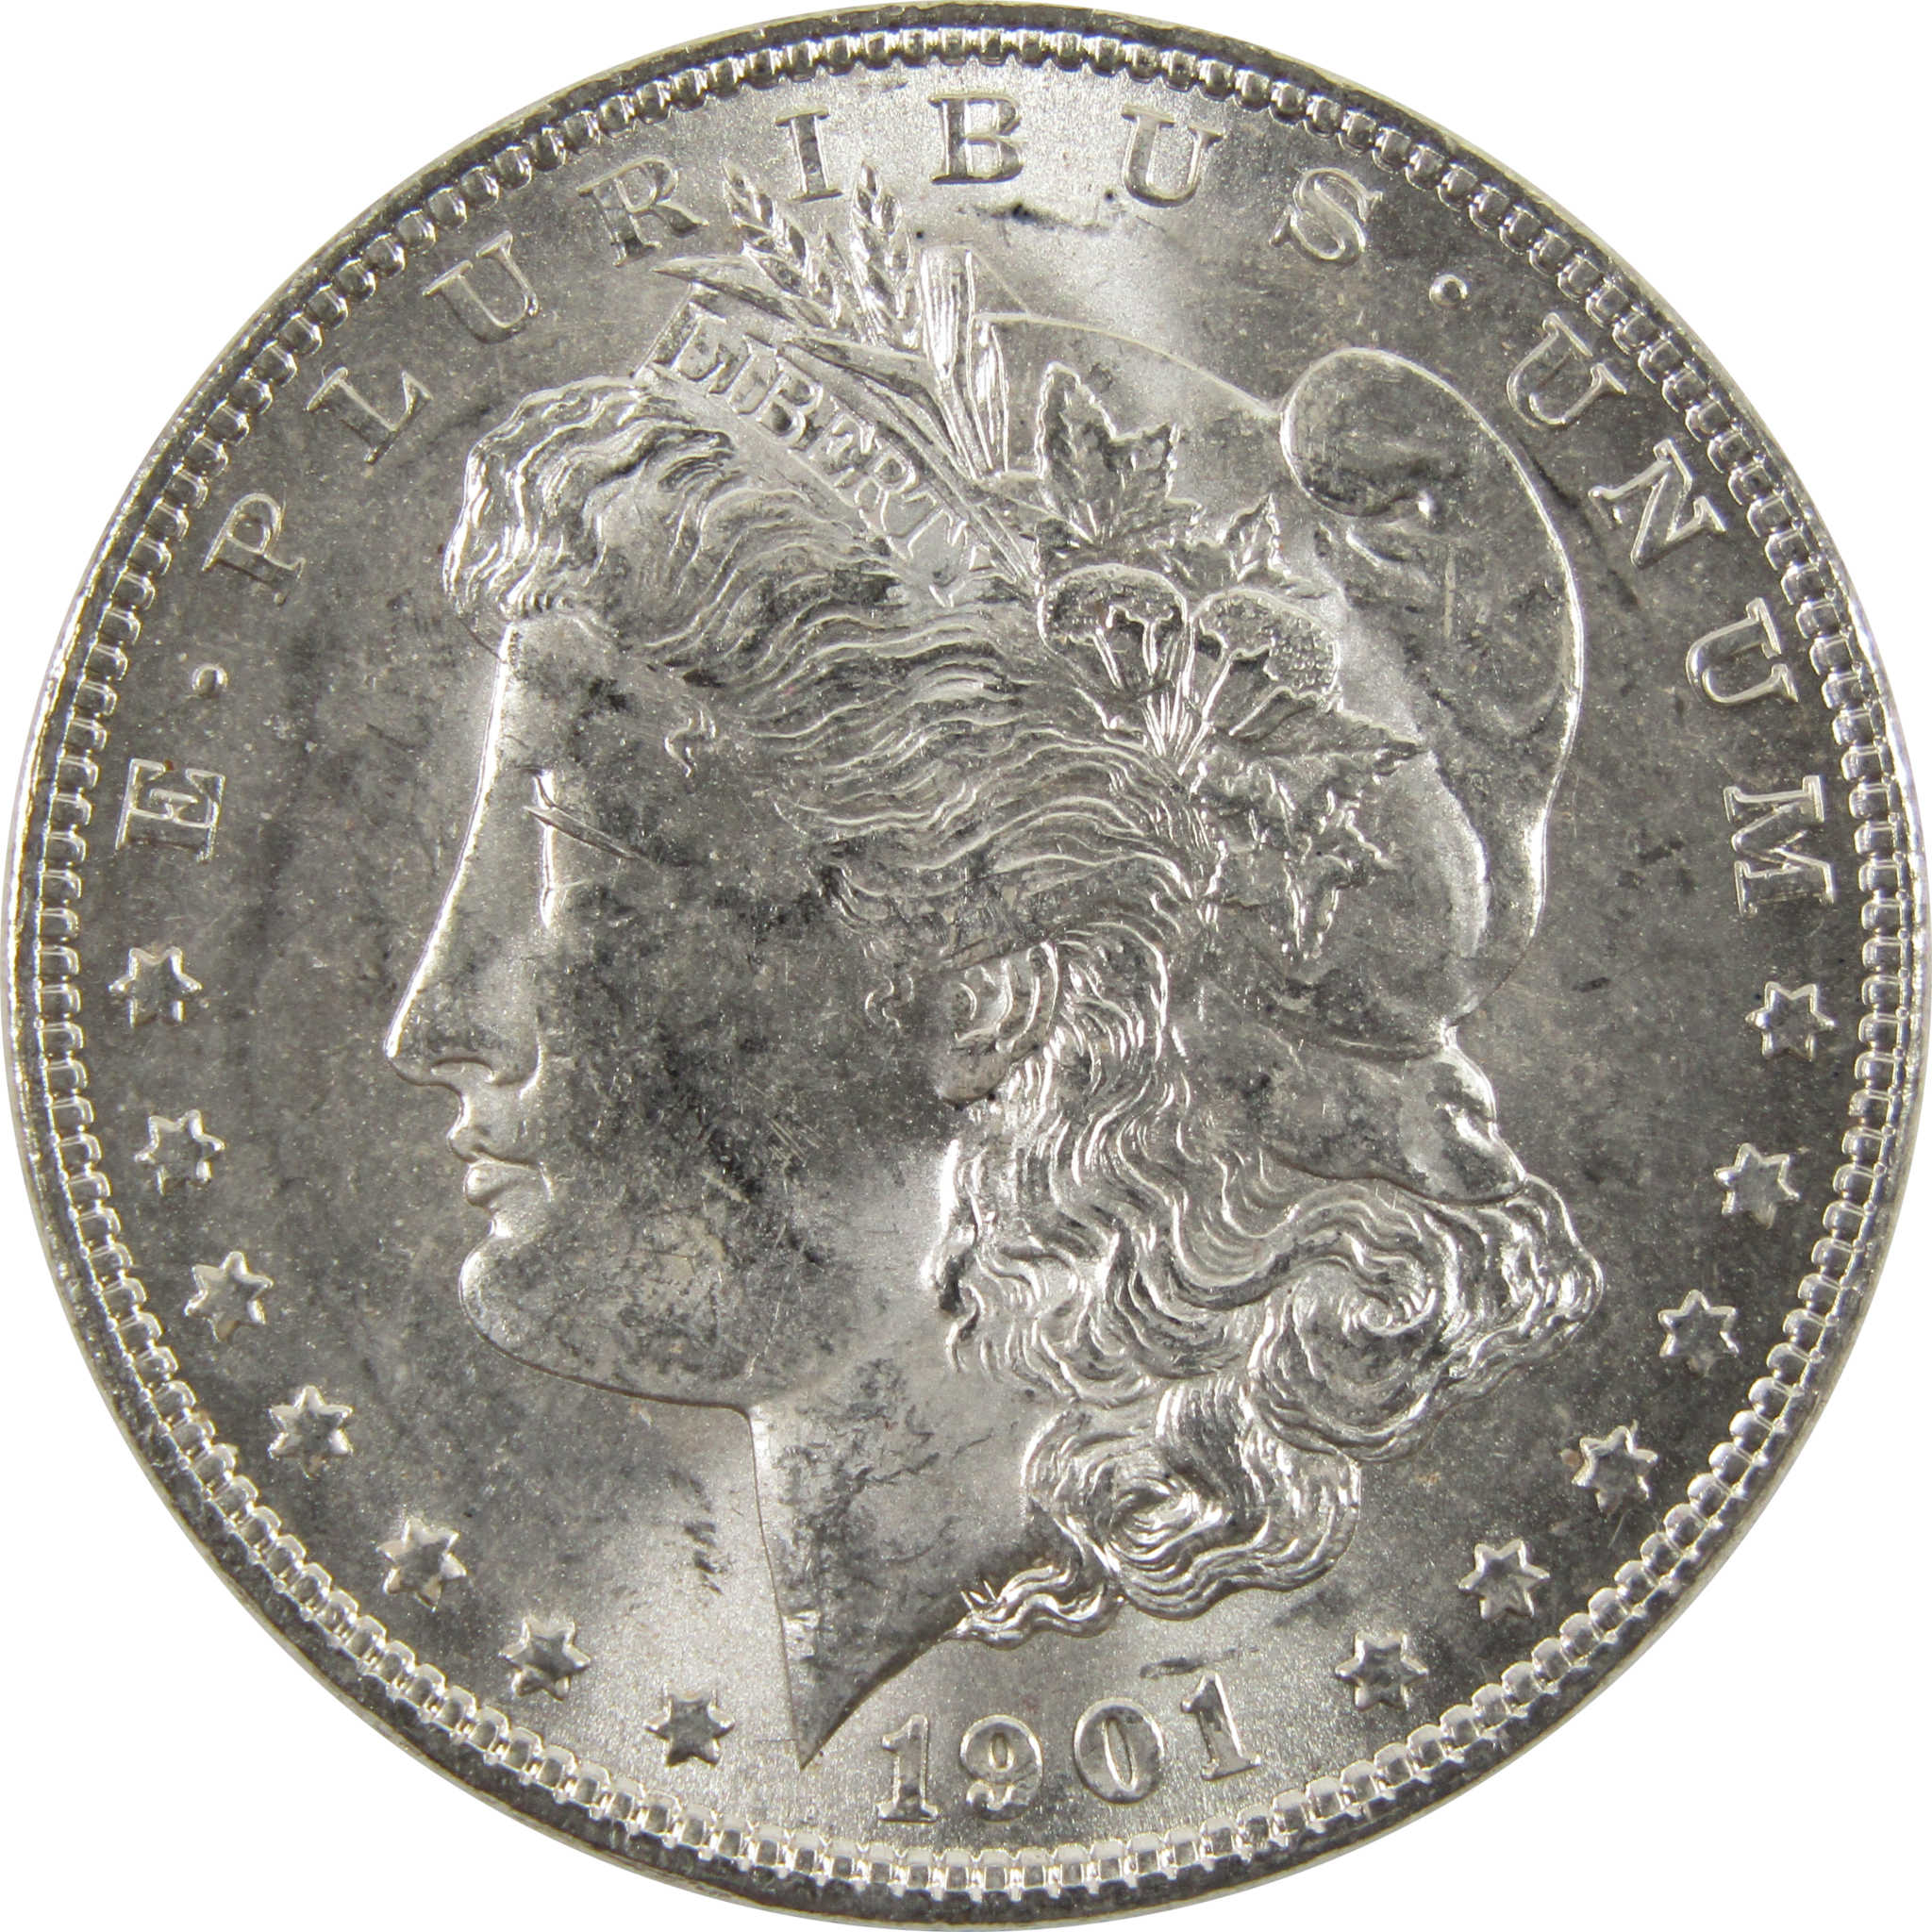 1901 O Morgan Dollar Uncirculated Details 90% Silver $1 SKU:I10465 - Morgan coin - Morgan silver dollar - Morgan silver dollar for sale - Profile Coins &amp; Collectibles